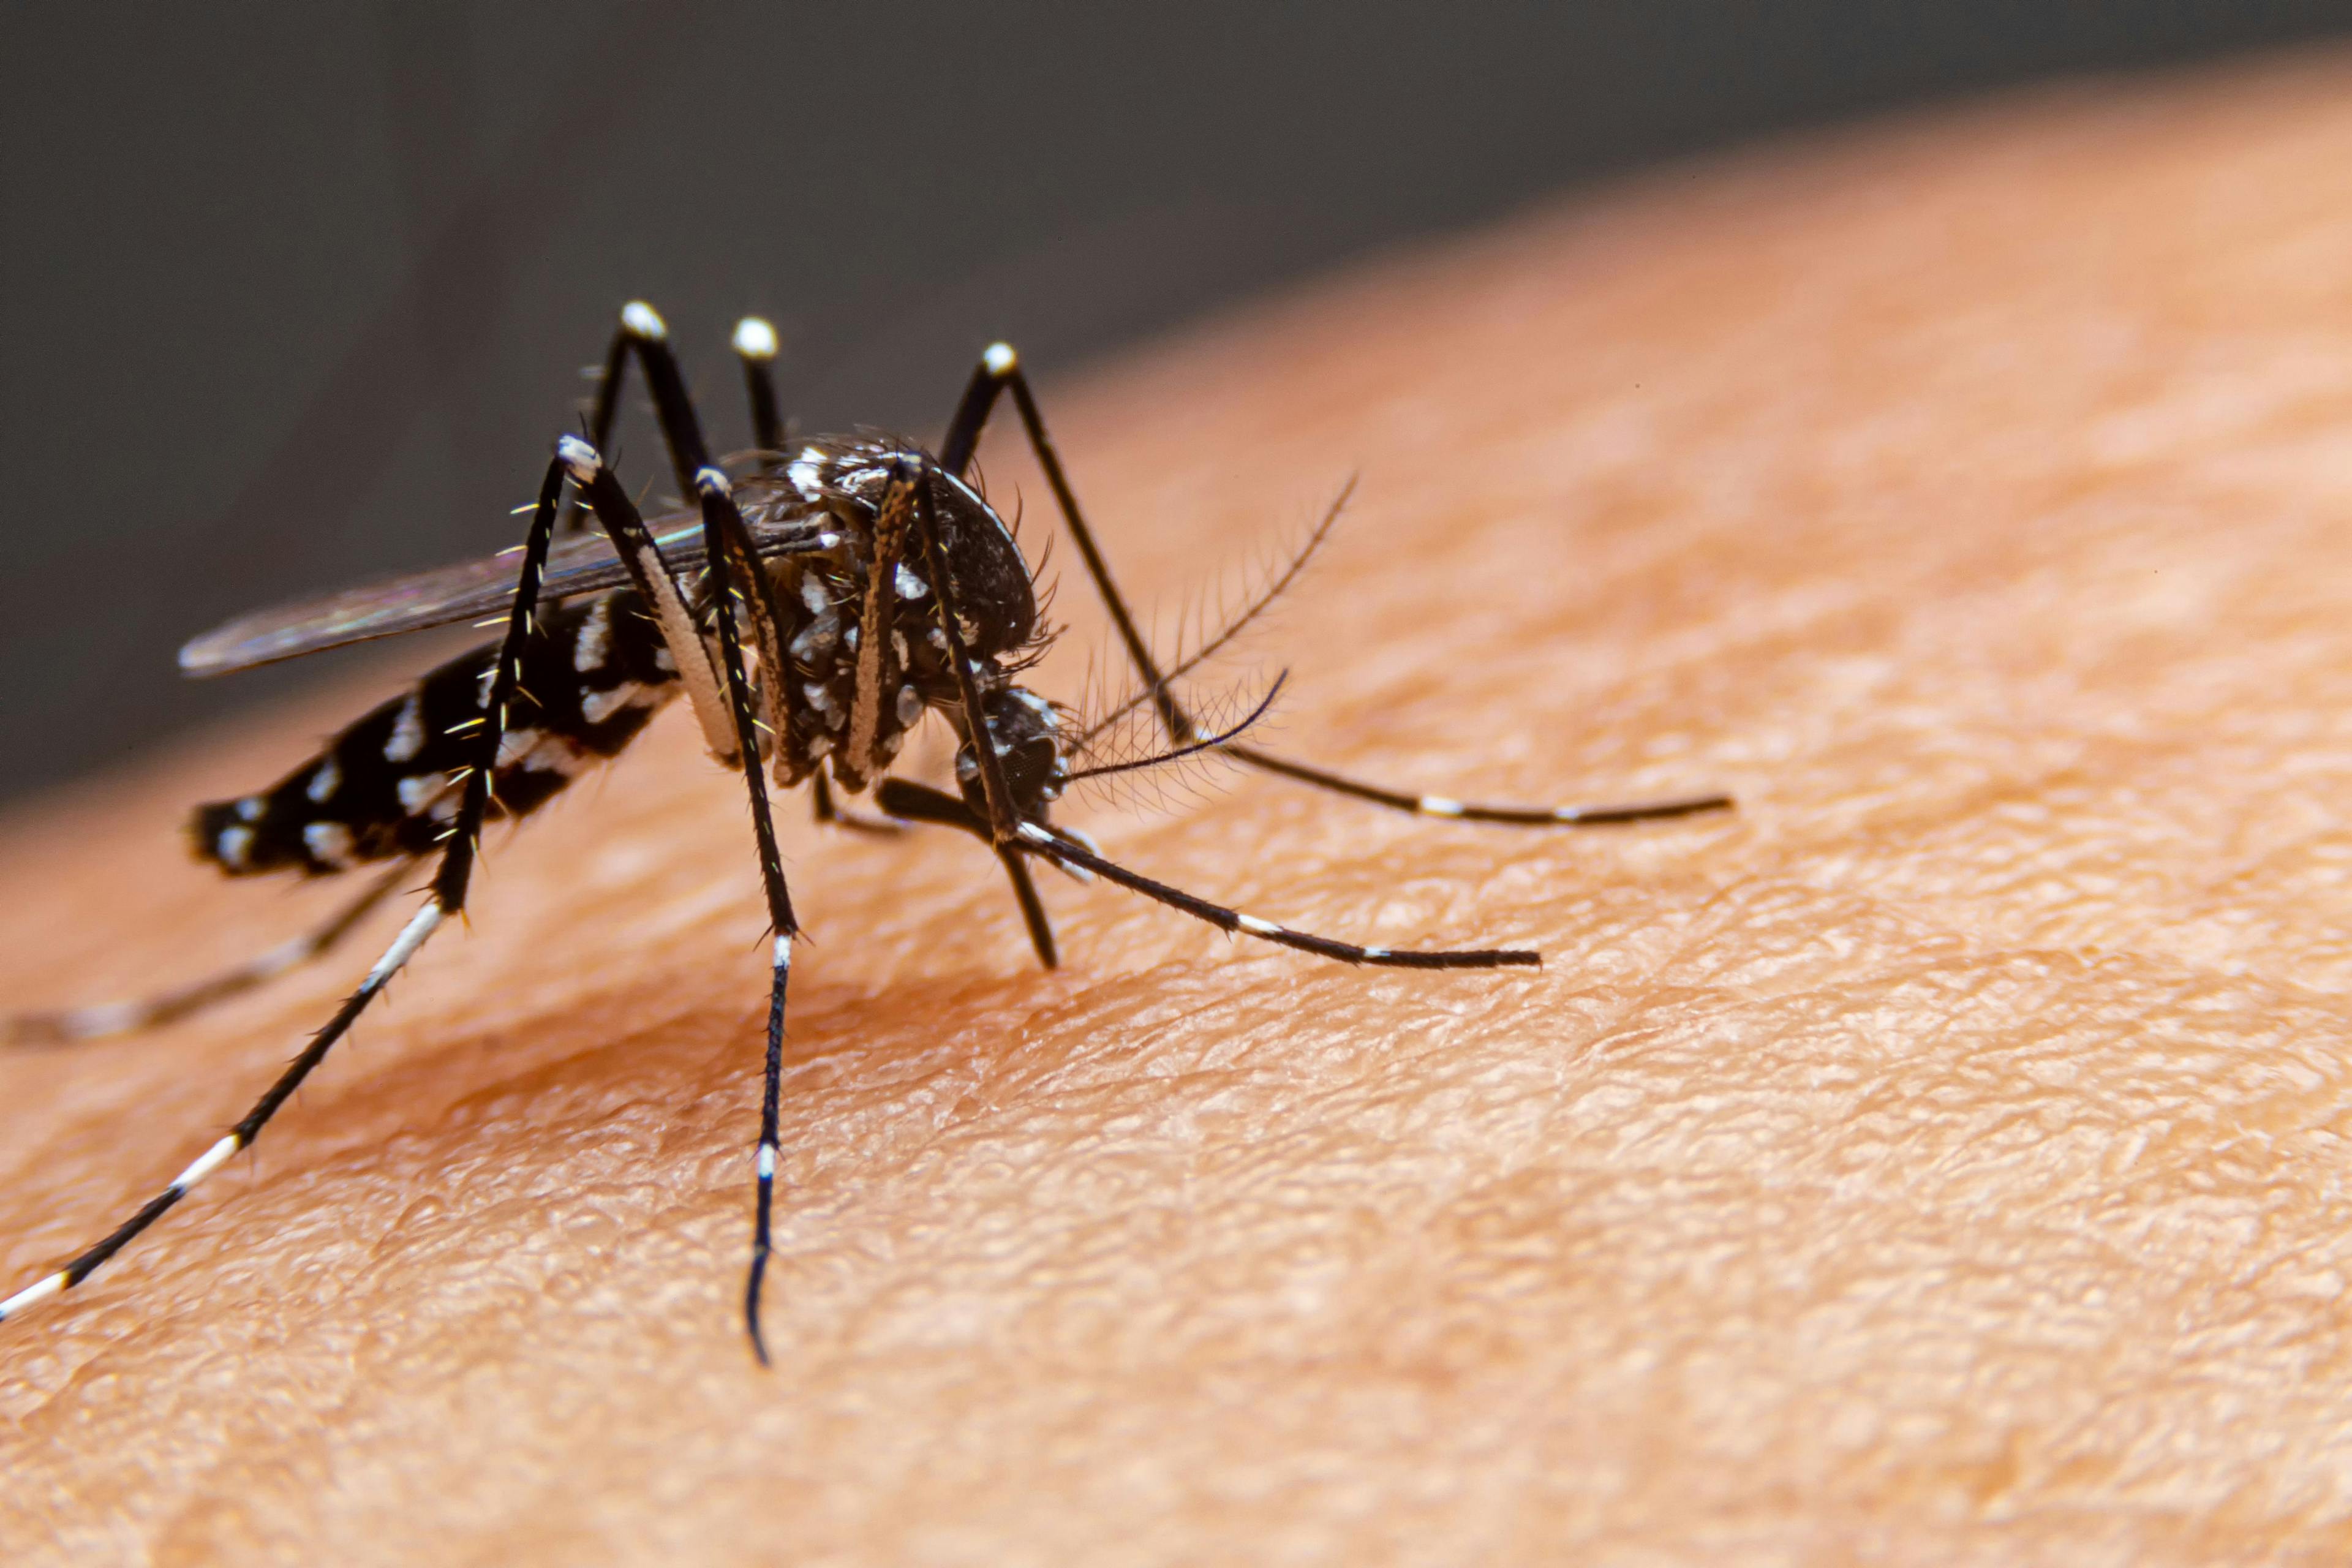 Dengue virus is transmitted by infected Aedes mosquitos. | Image credit: witsawat - stock.adobe.com